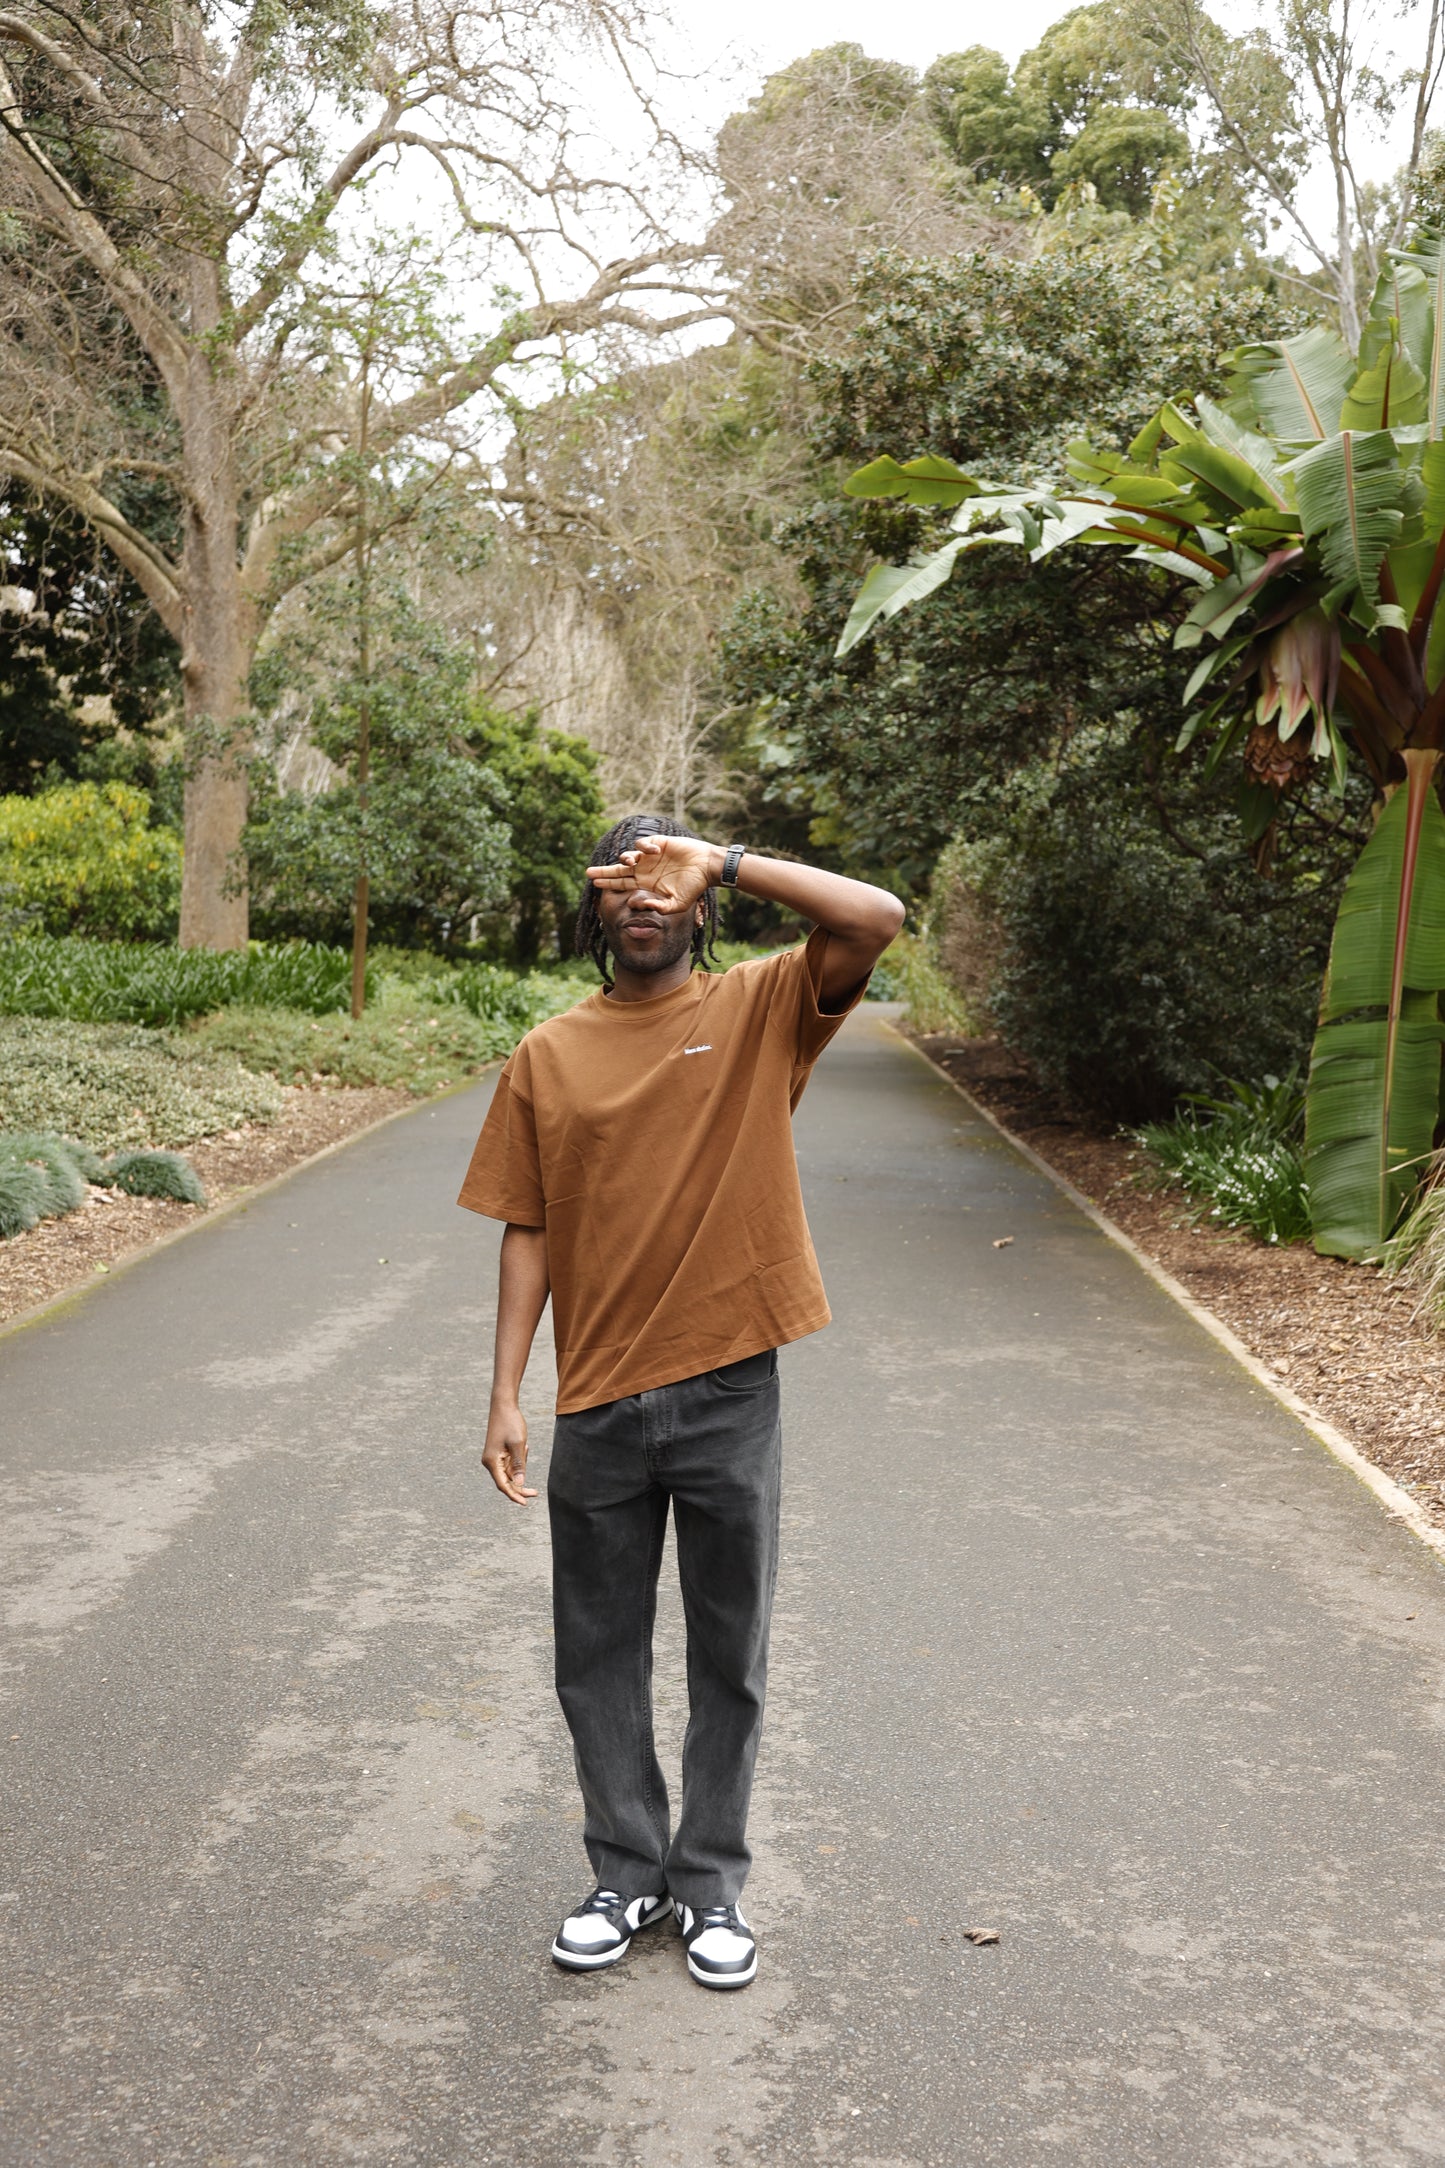 Collection 01 Tee in Brown